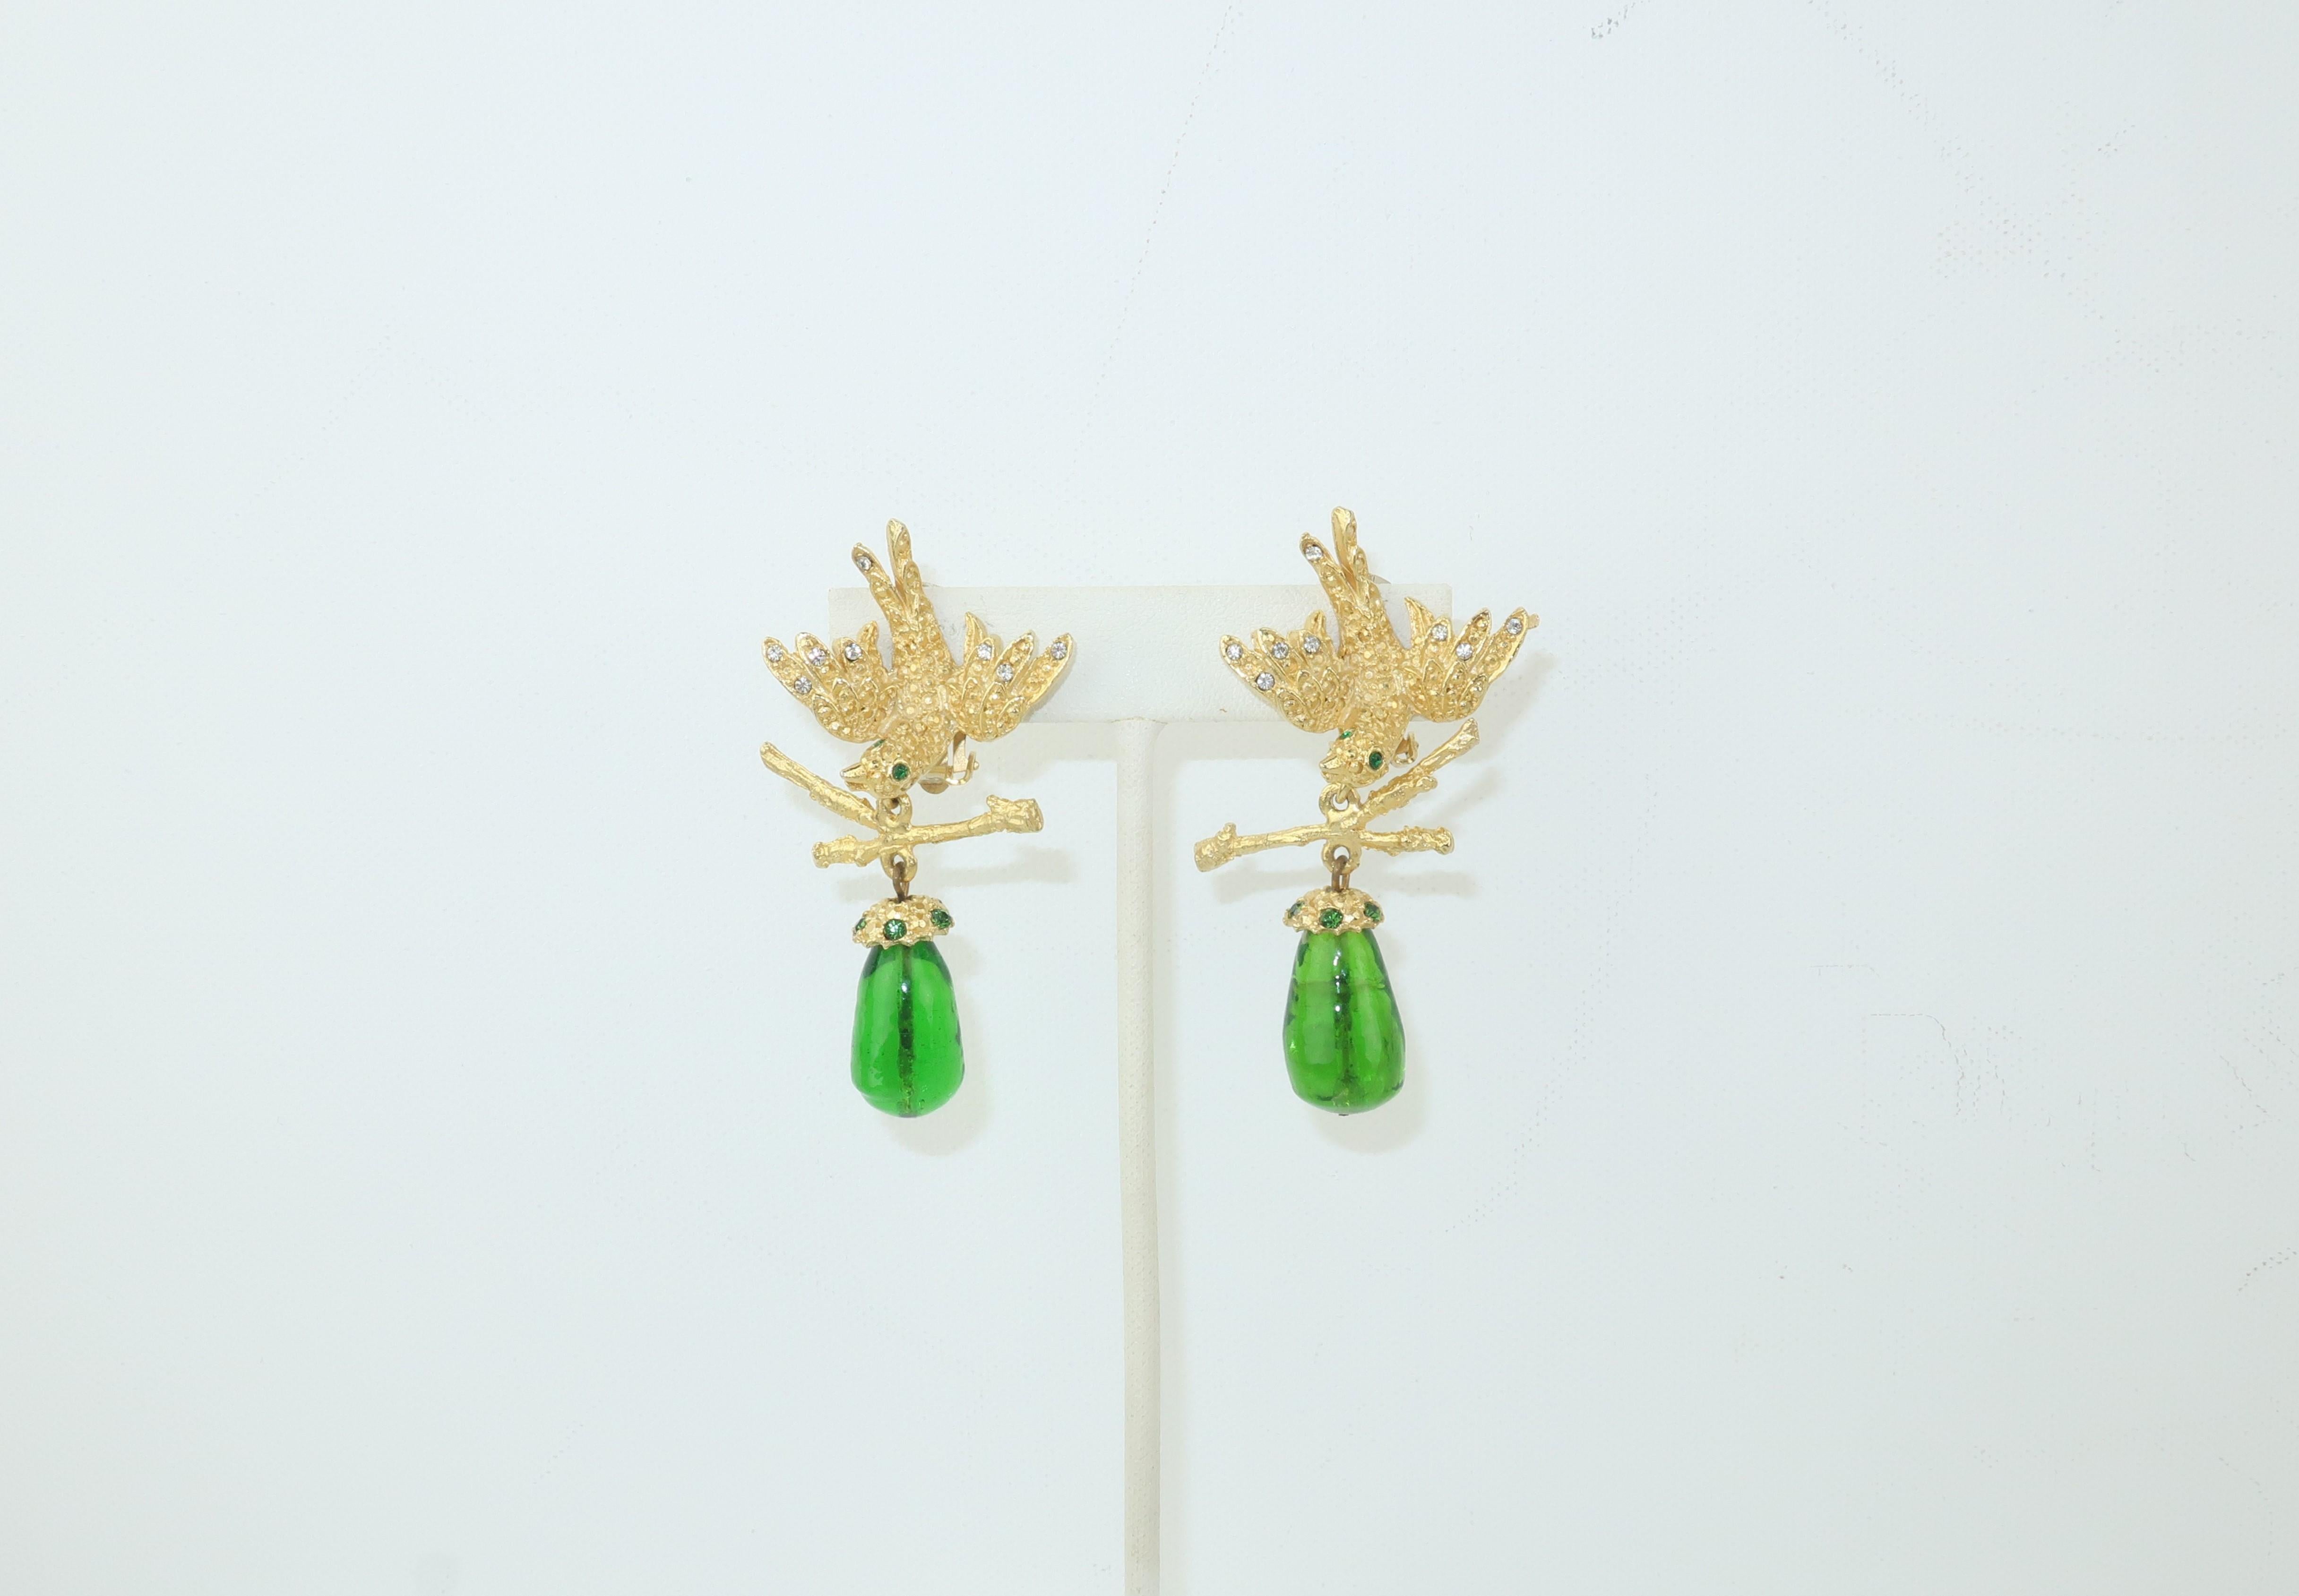 Lovely Gerard Yosca gold tone clip on earrings depicting a bird in flight with an articulated dangle of branches suspending an emerald green glass drop.  The birds are detailed with faceted gold beading accented by crystal rhinestones and feature